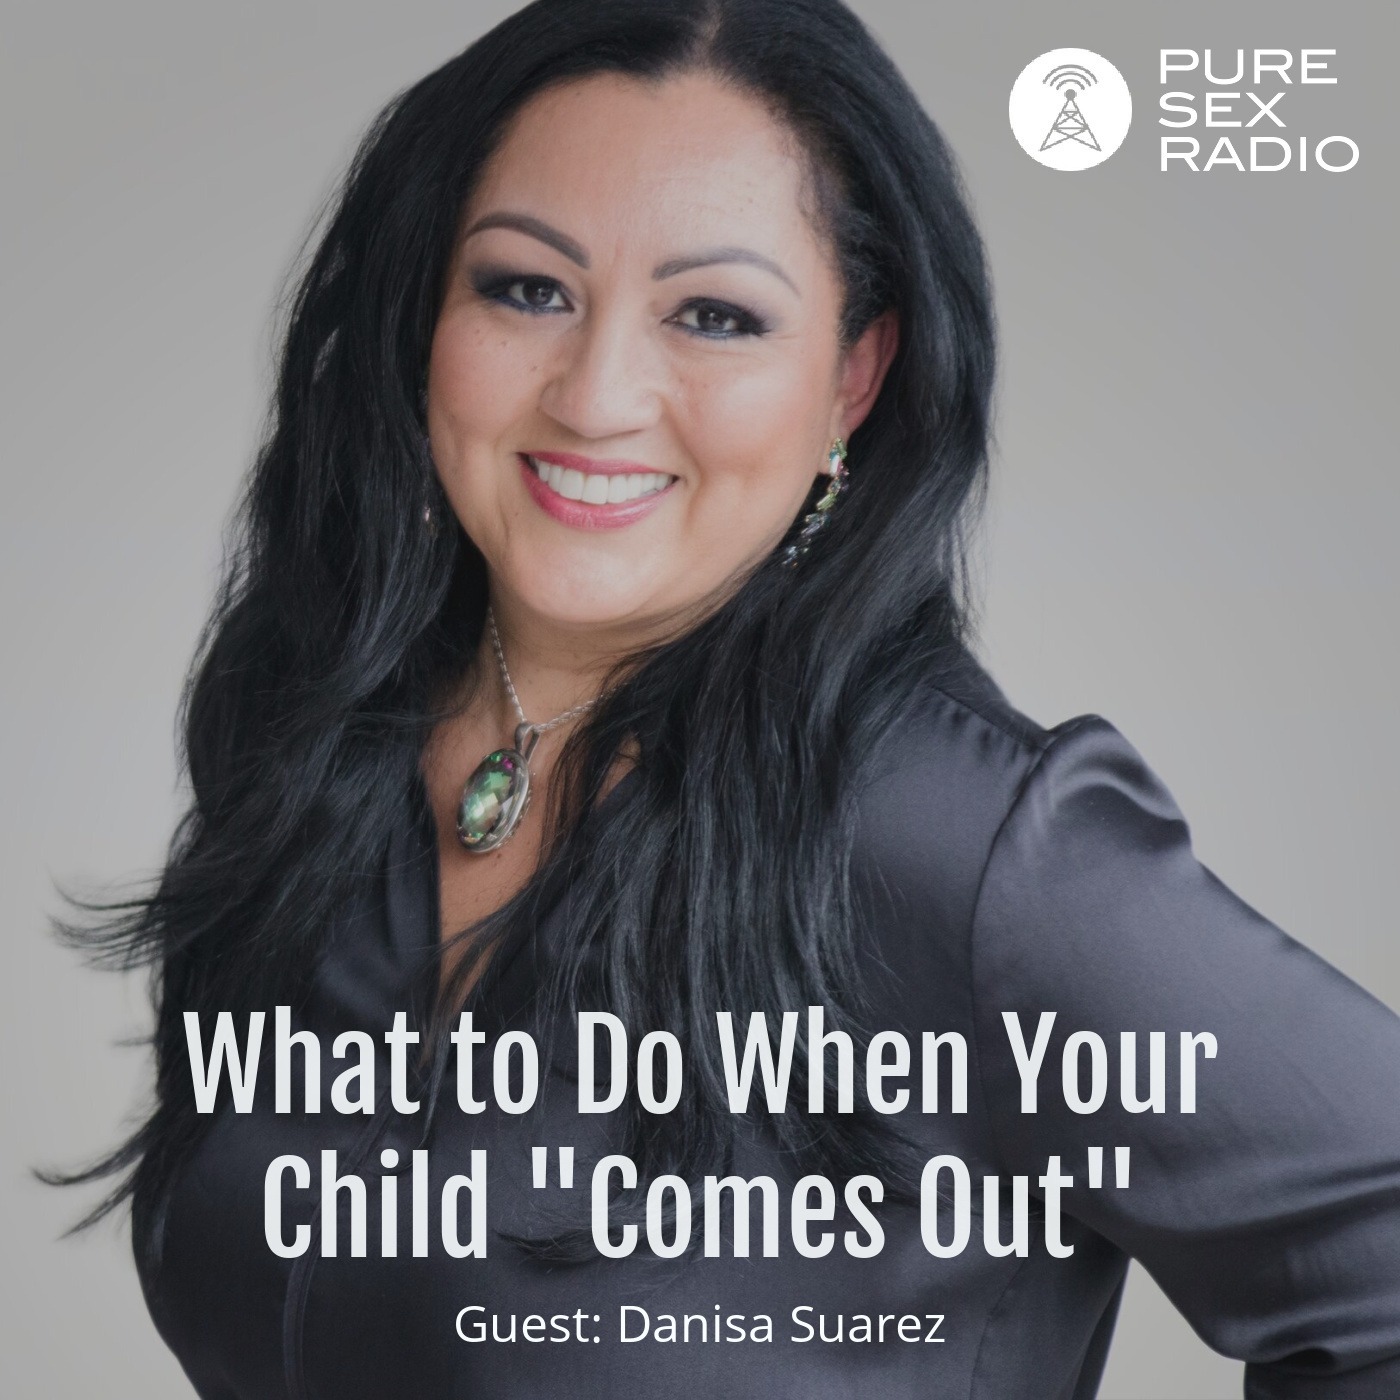 What to Do When Your Child ”Comes Out”